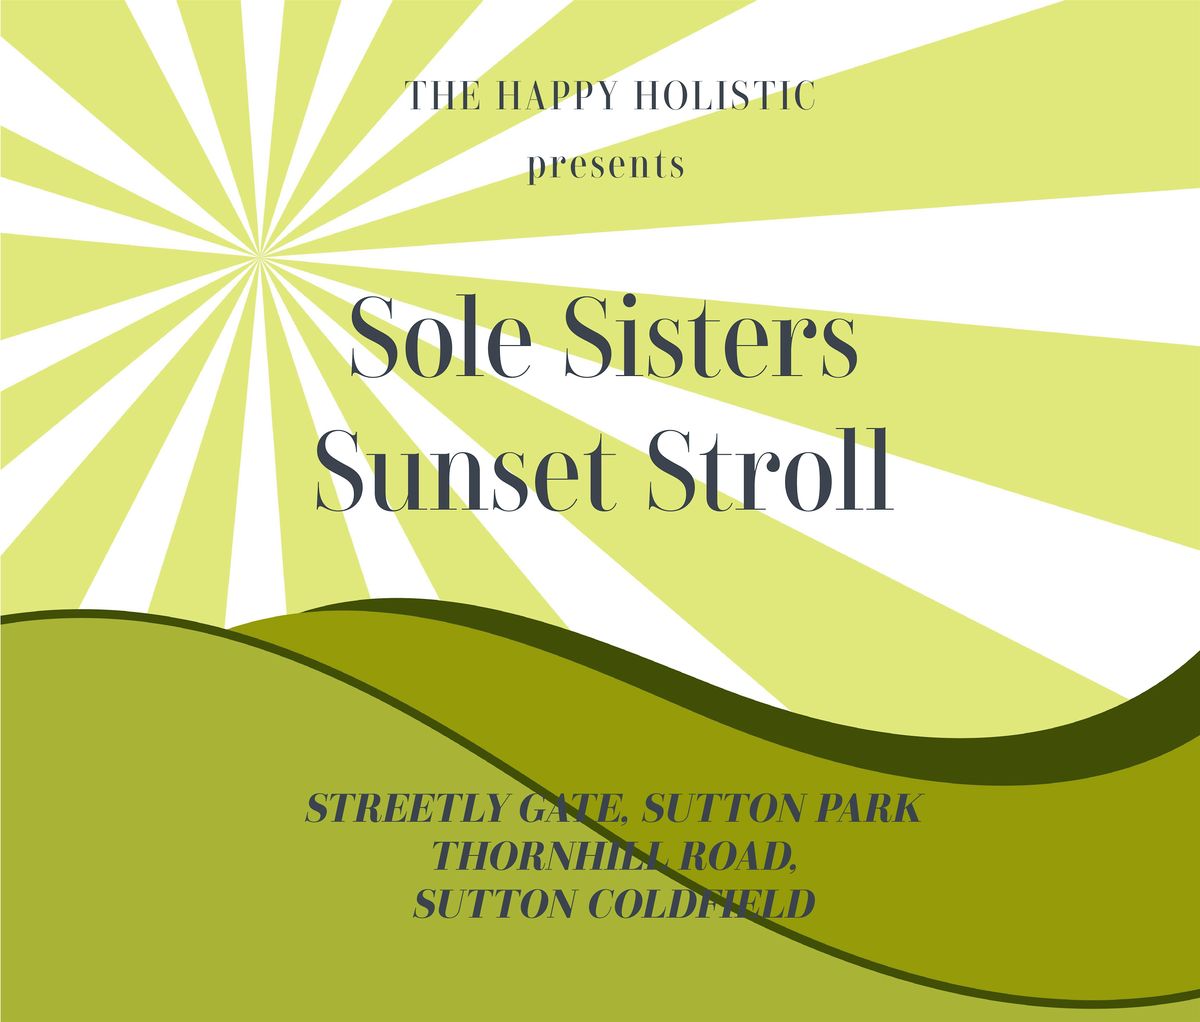 Sole Sisters  Sunset Stroll - Free Event